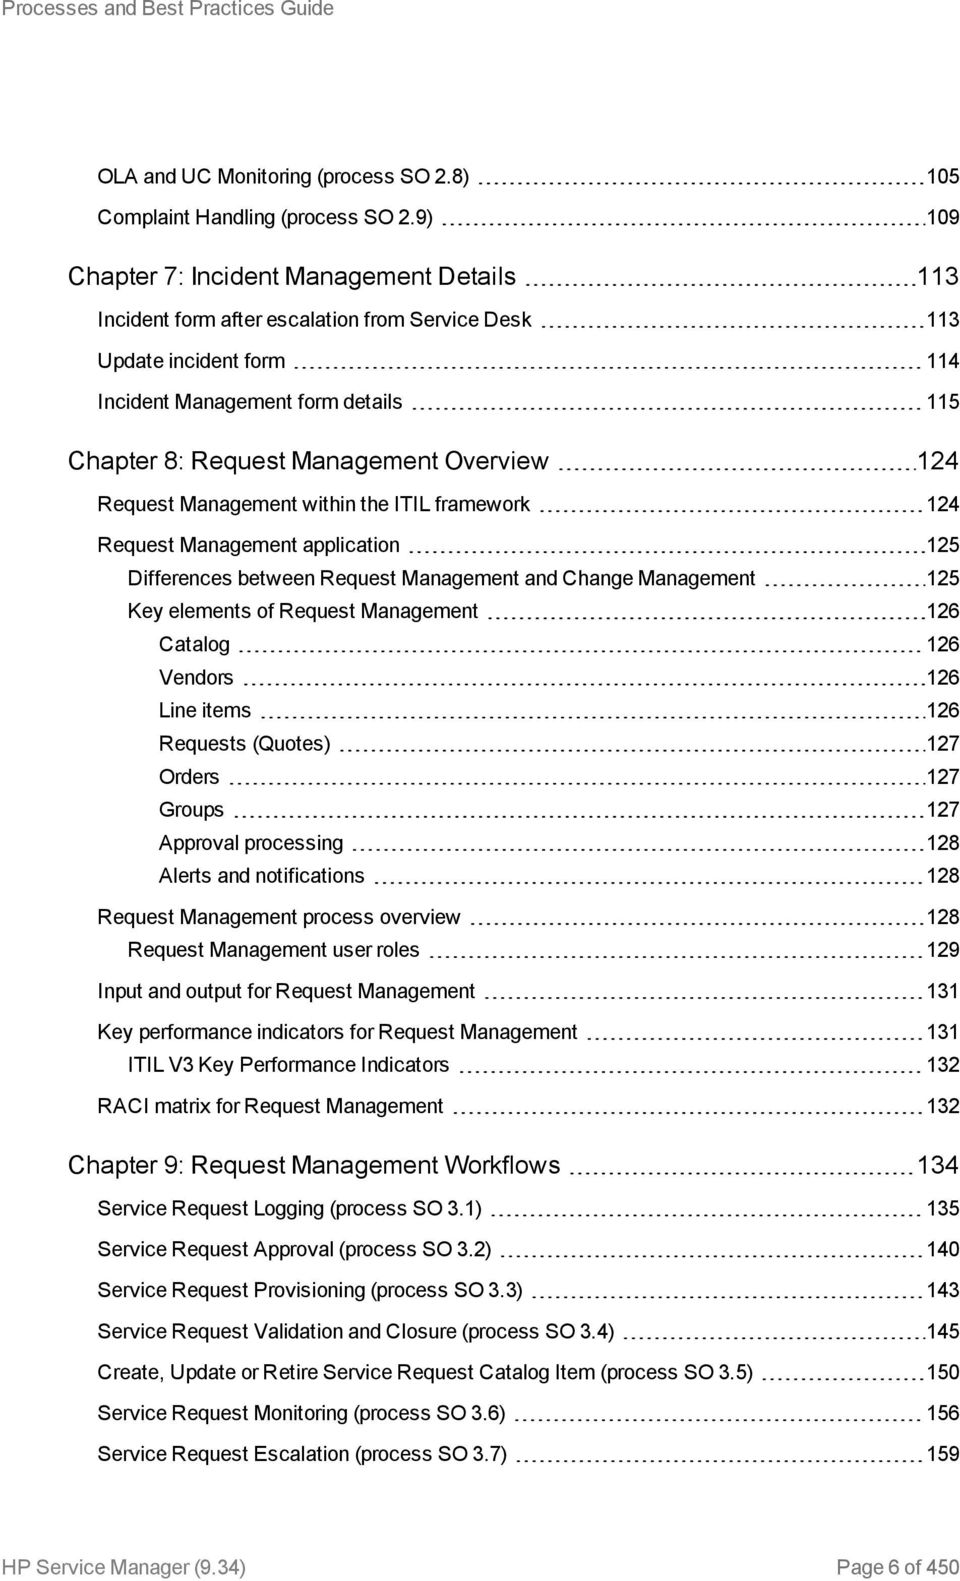 Overview 124 Request Management within the ITIL framework 124 Request Management application 125 Differences between Request Management and Change Management 125 Key elements of Request Management